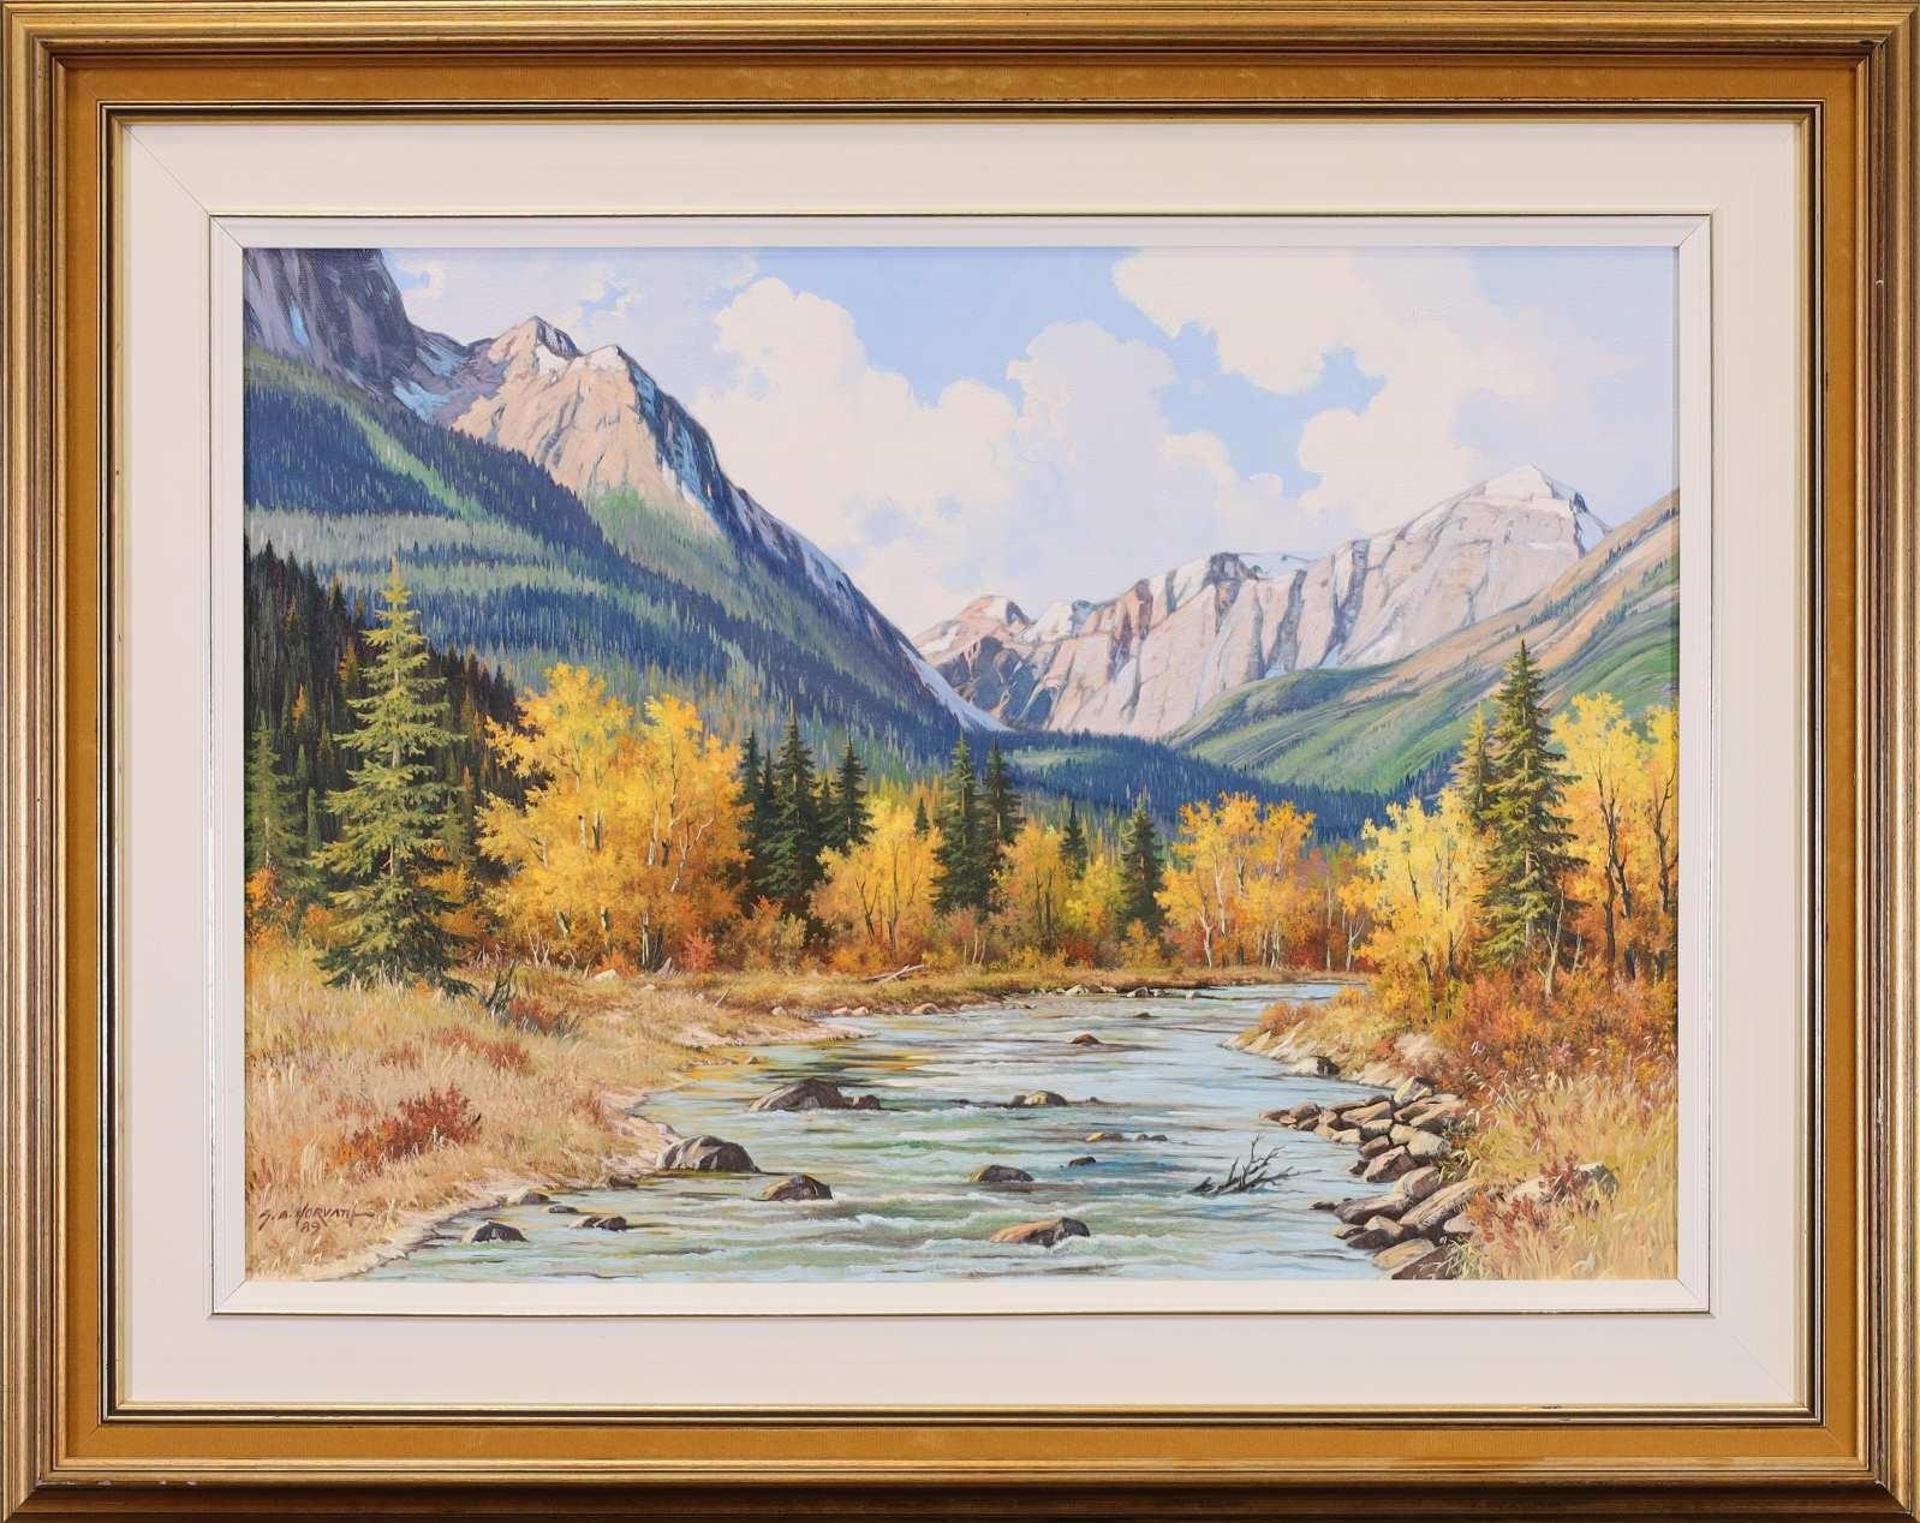 George A. Horvath (1933-2012) - “October in Kananaskis”; 1989